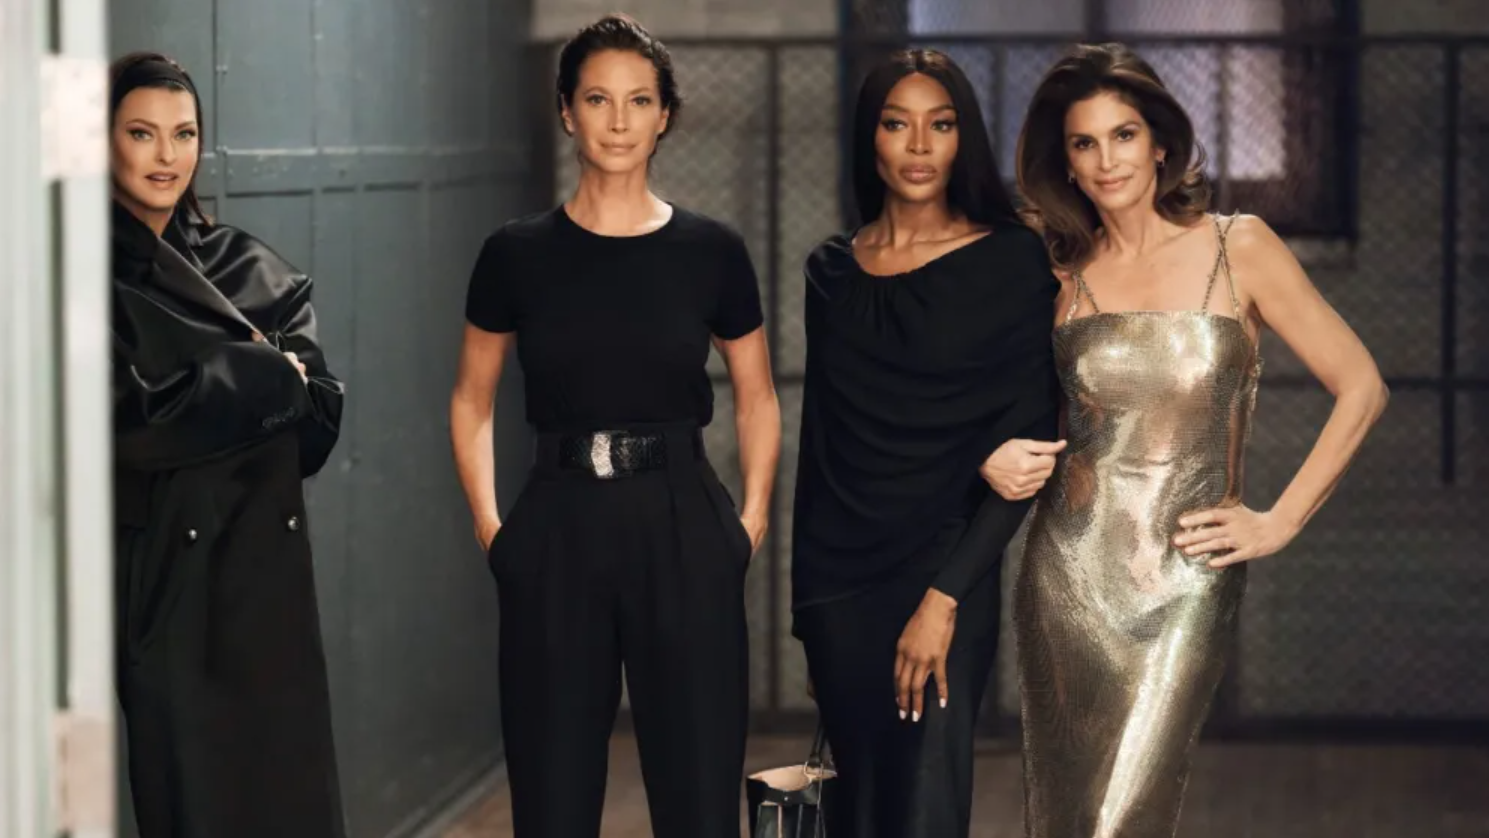 Apple TV+’s The Super Models gives a candid look at the industry